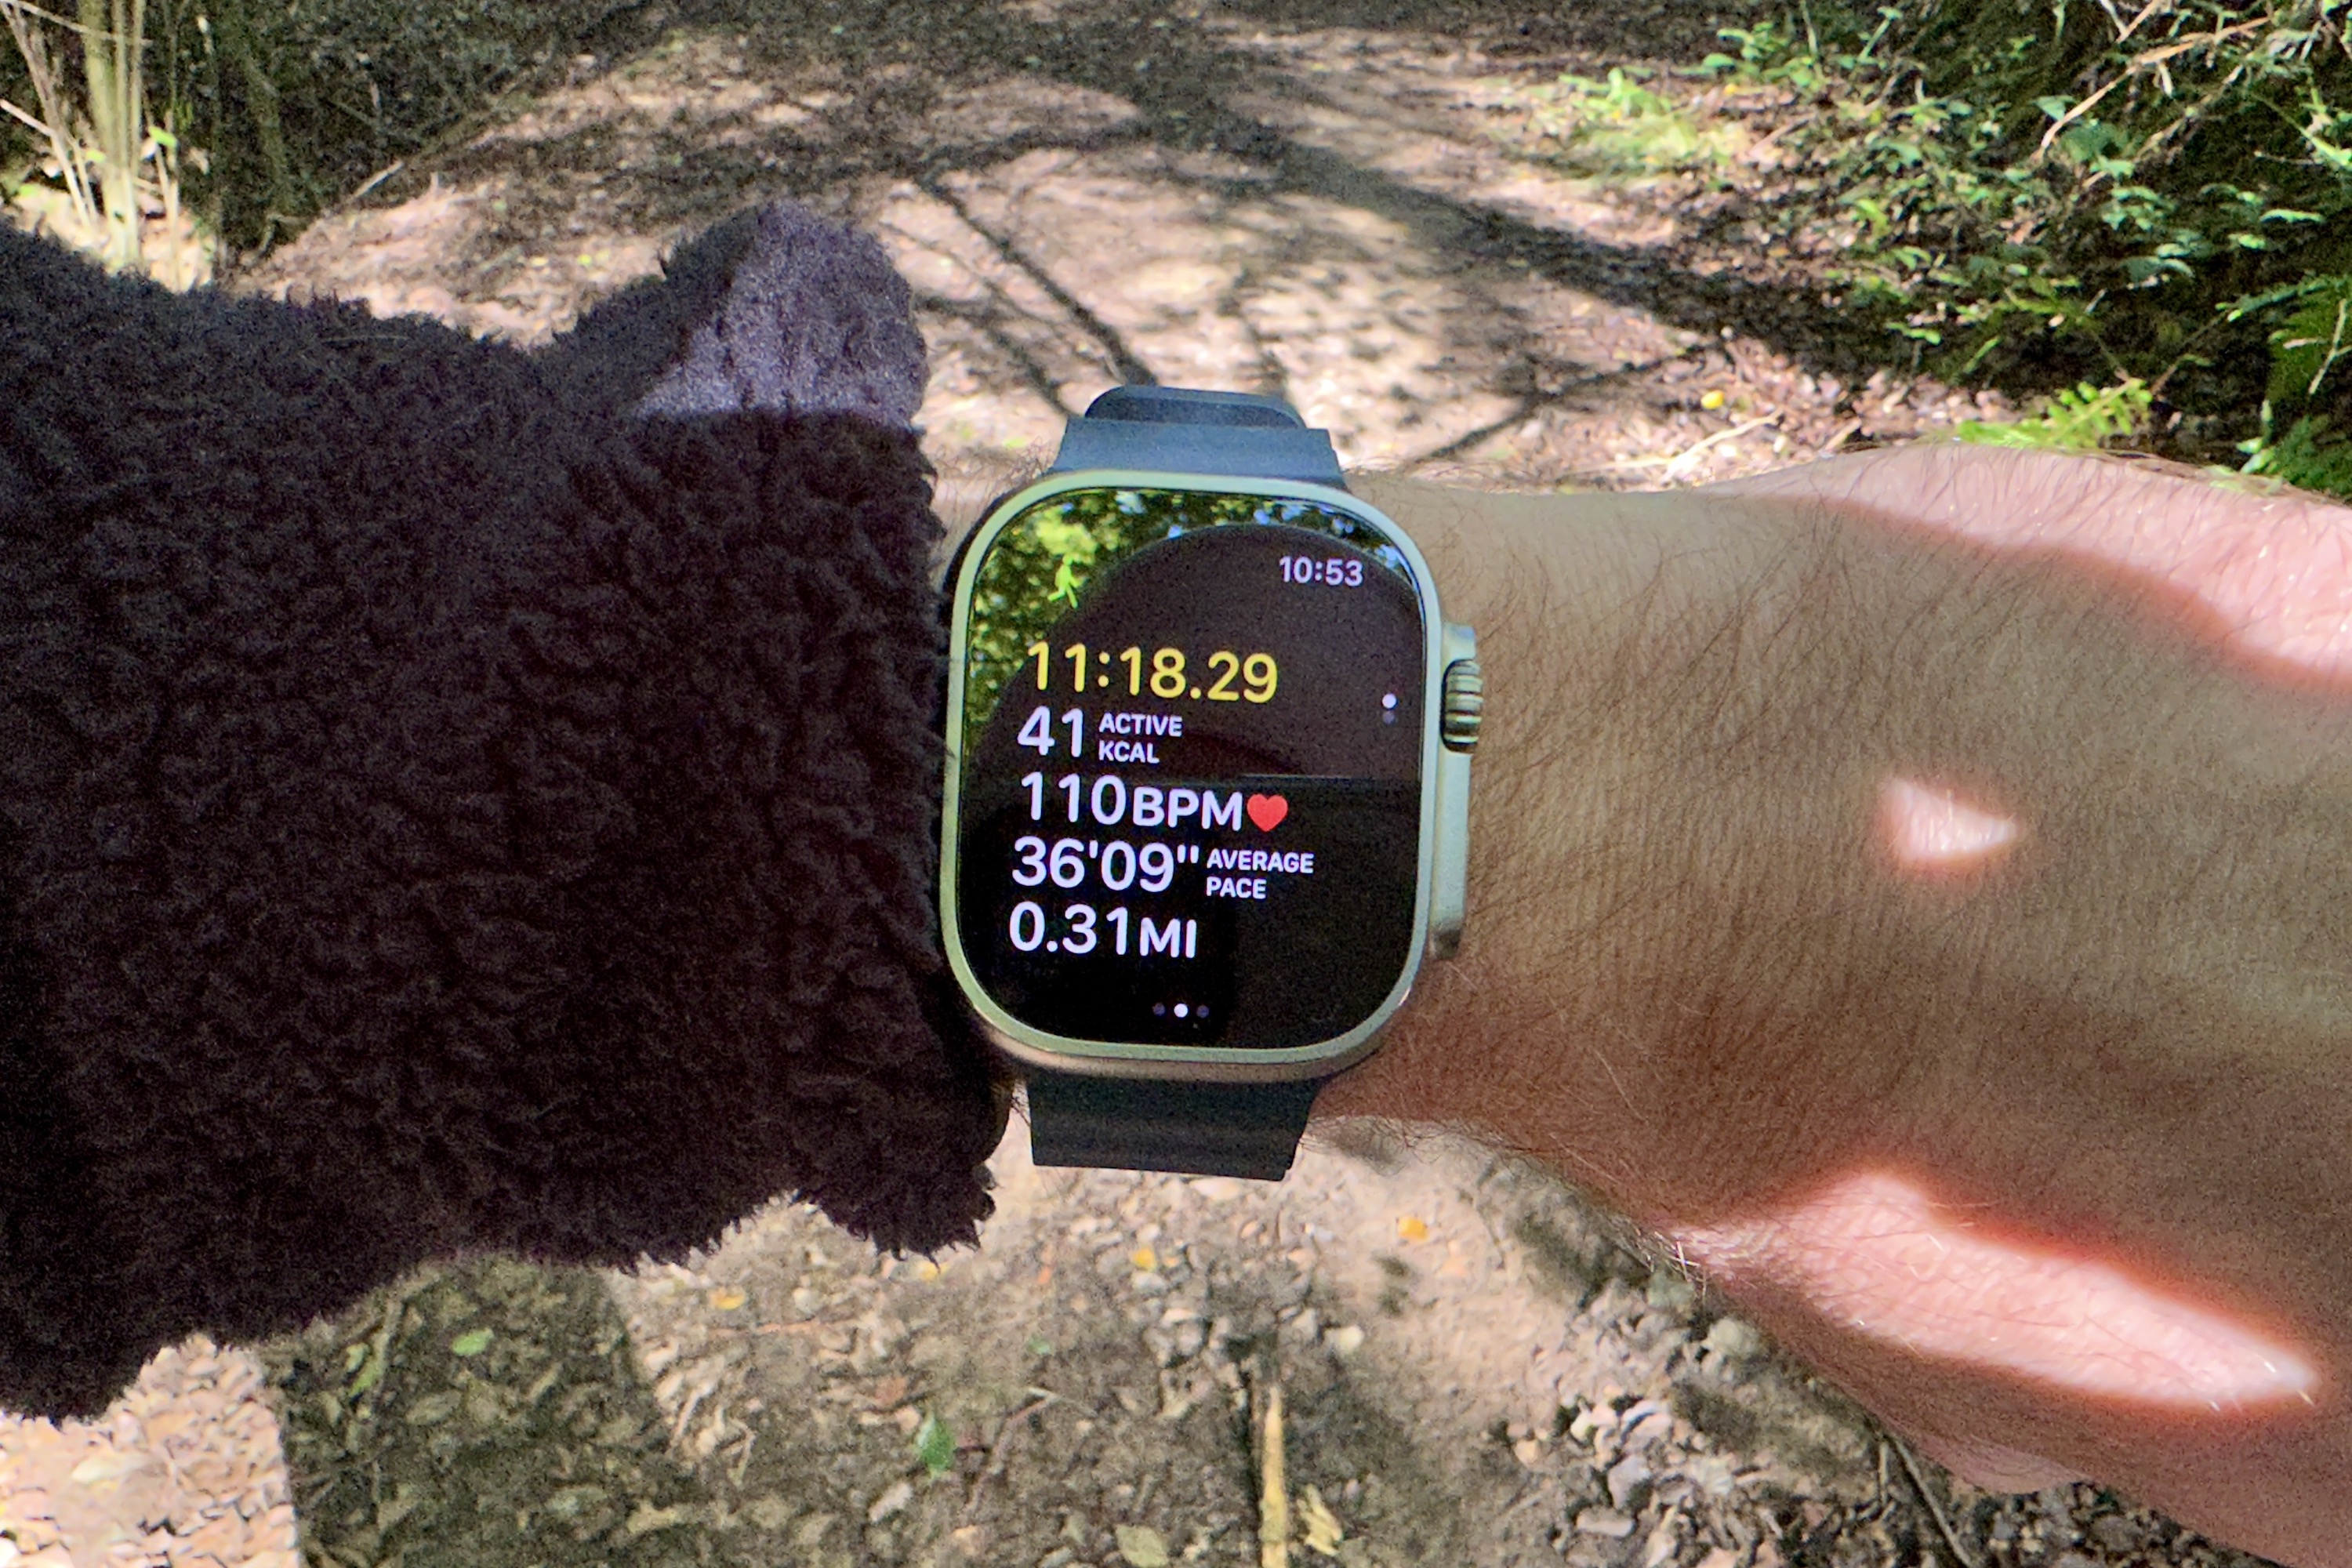 Apple Watch Ultra review: Does this wearable benefit non-fitness folks,  too?